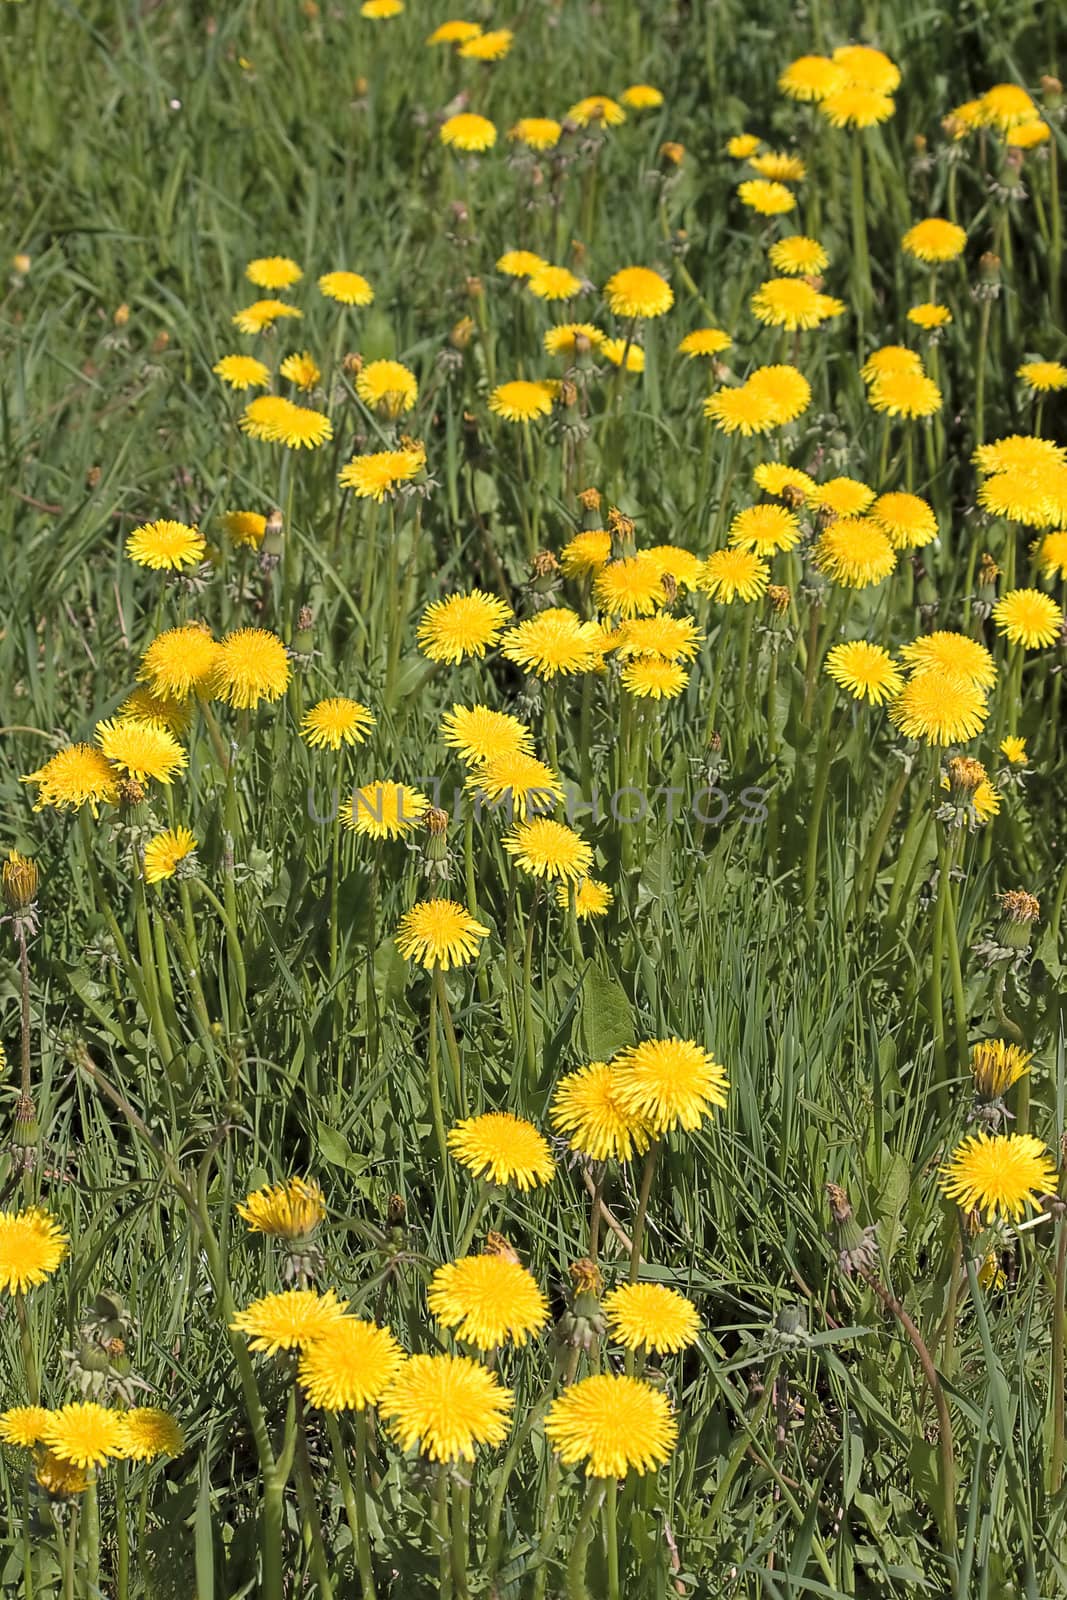 Several dandelion flowers on background of flowering field. Image with shallow depth of field